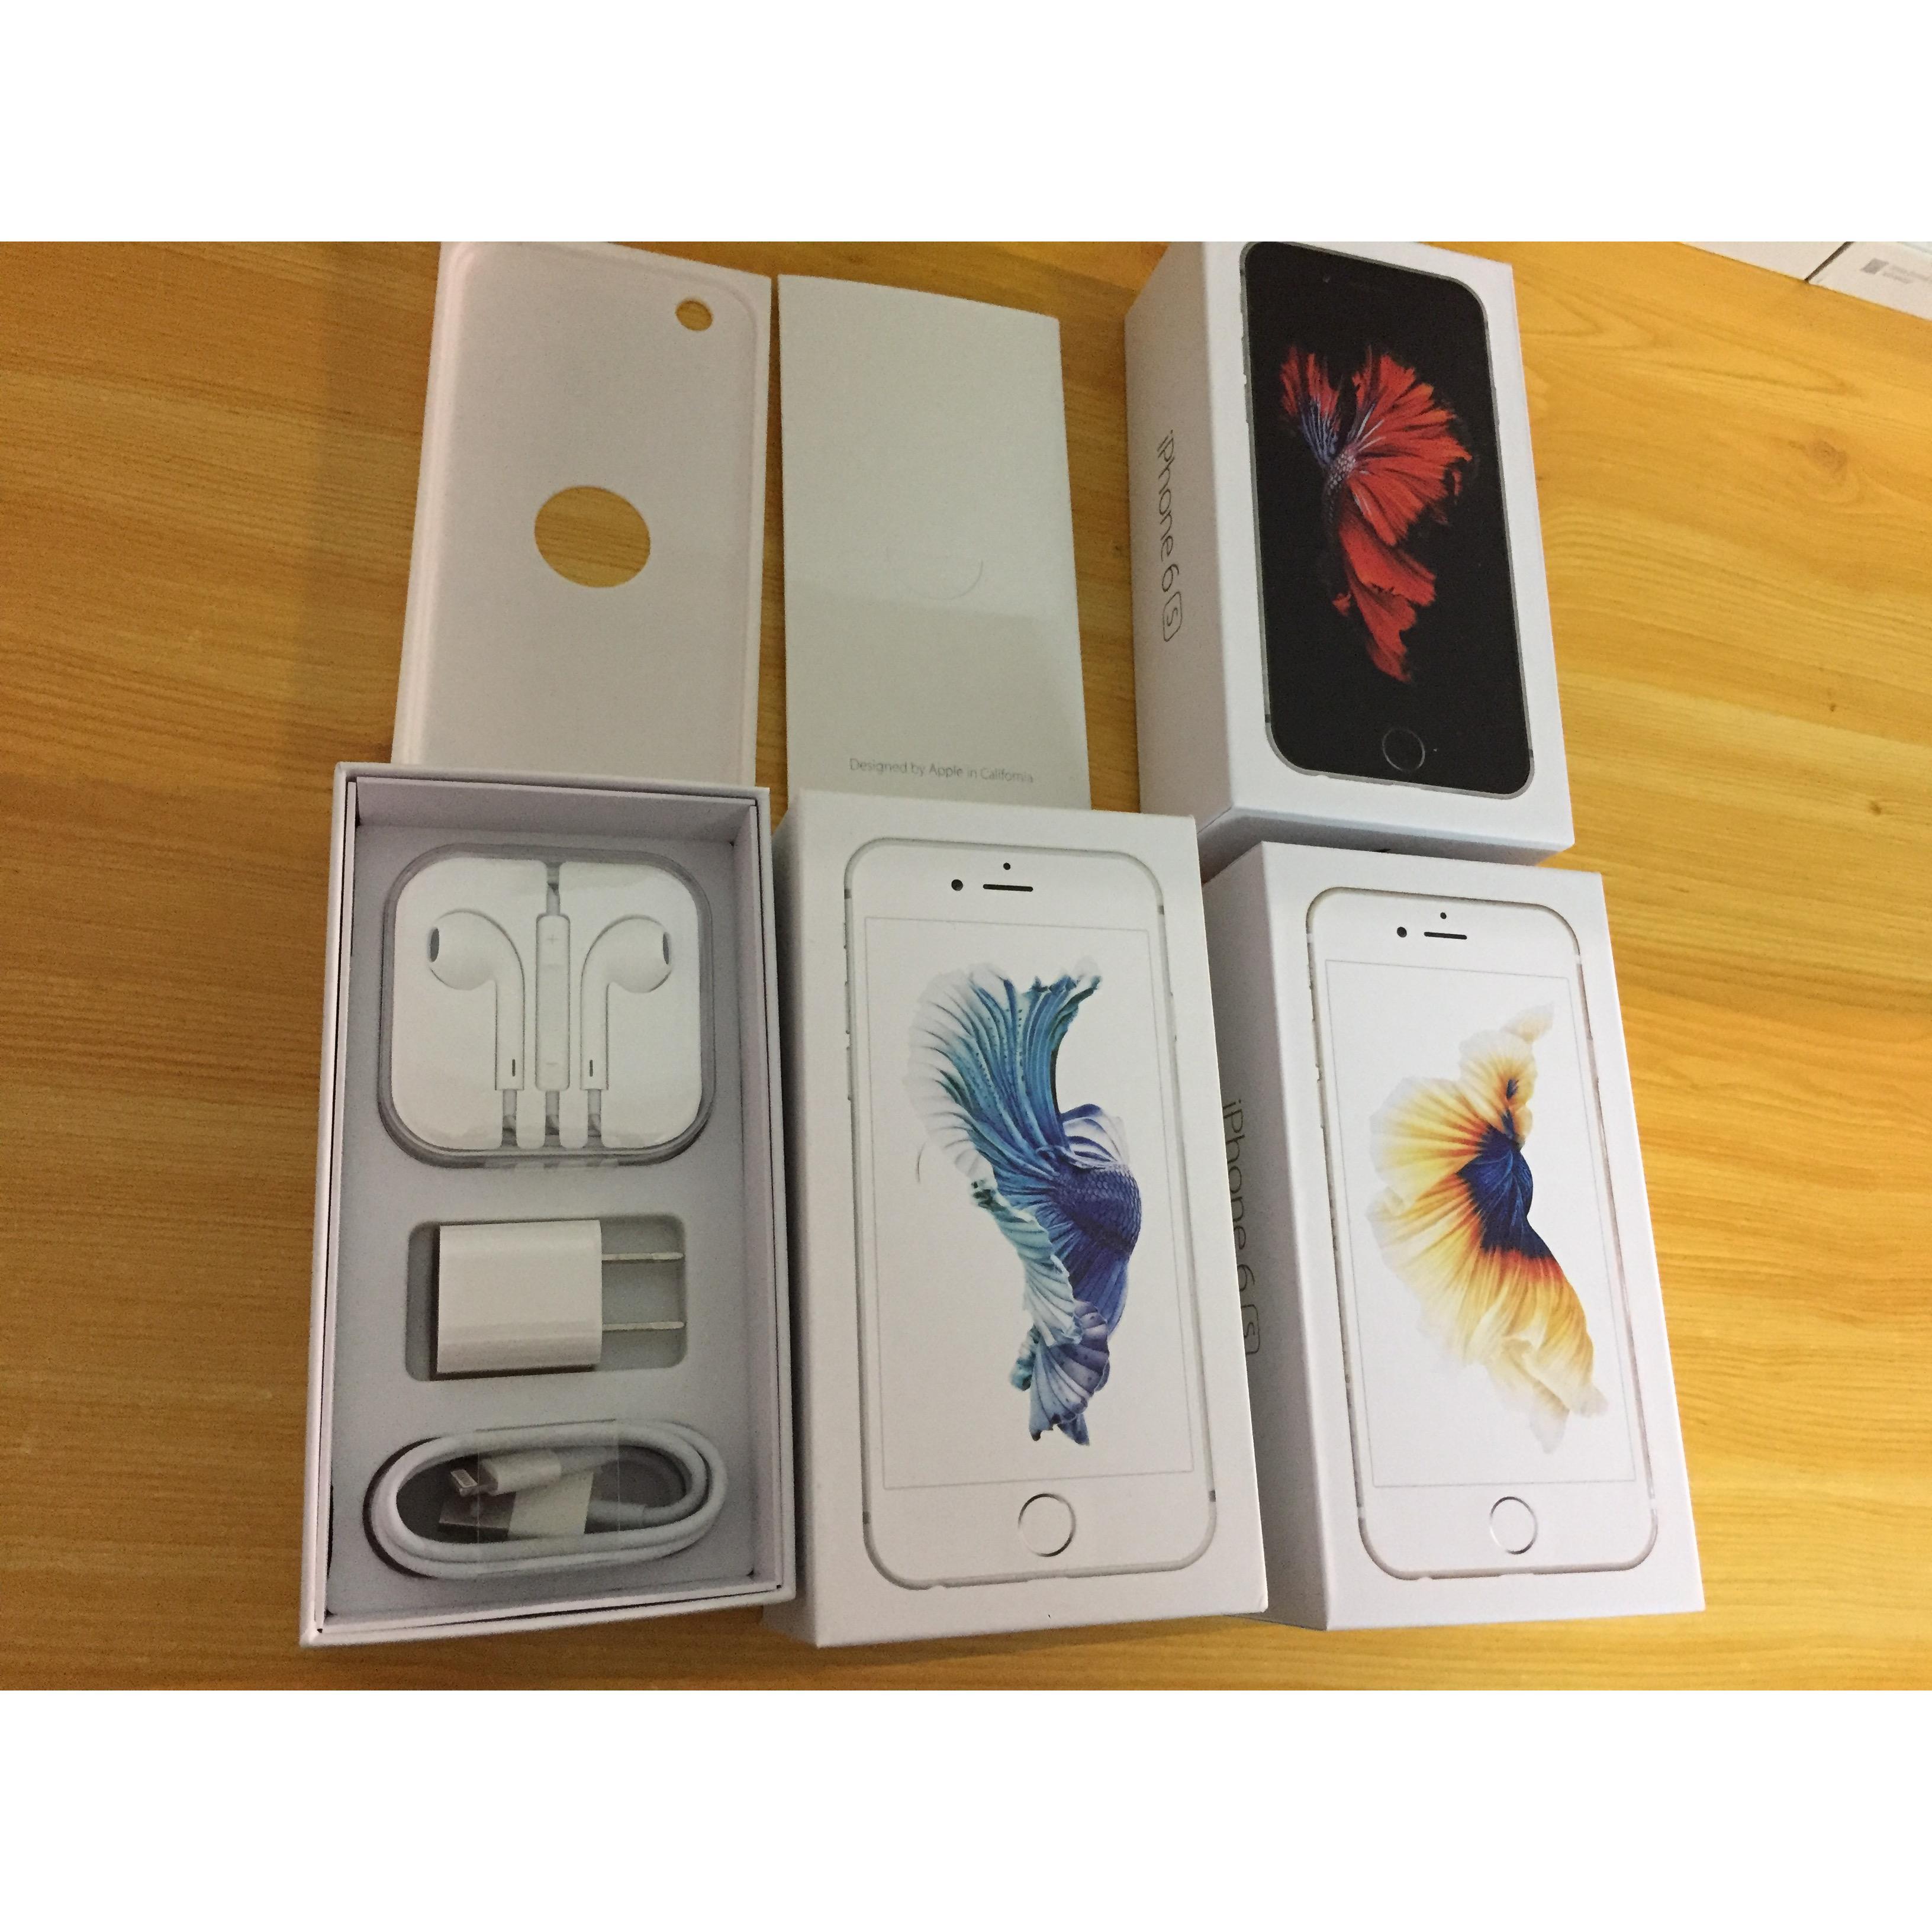 Apple Iphone 6S Boxes Kitted Accessories Wholesale Suppliers